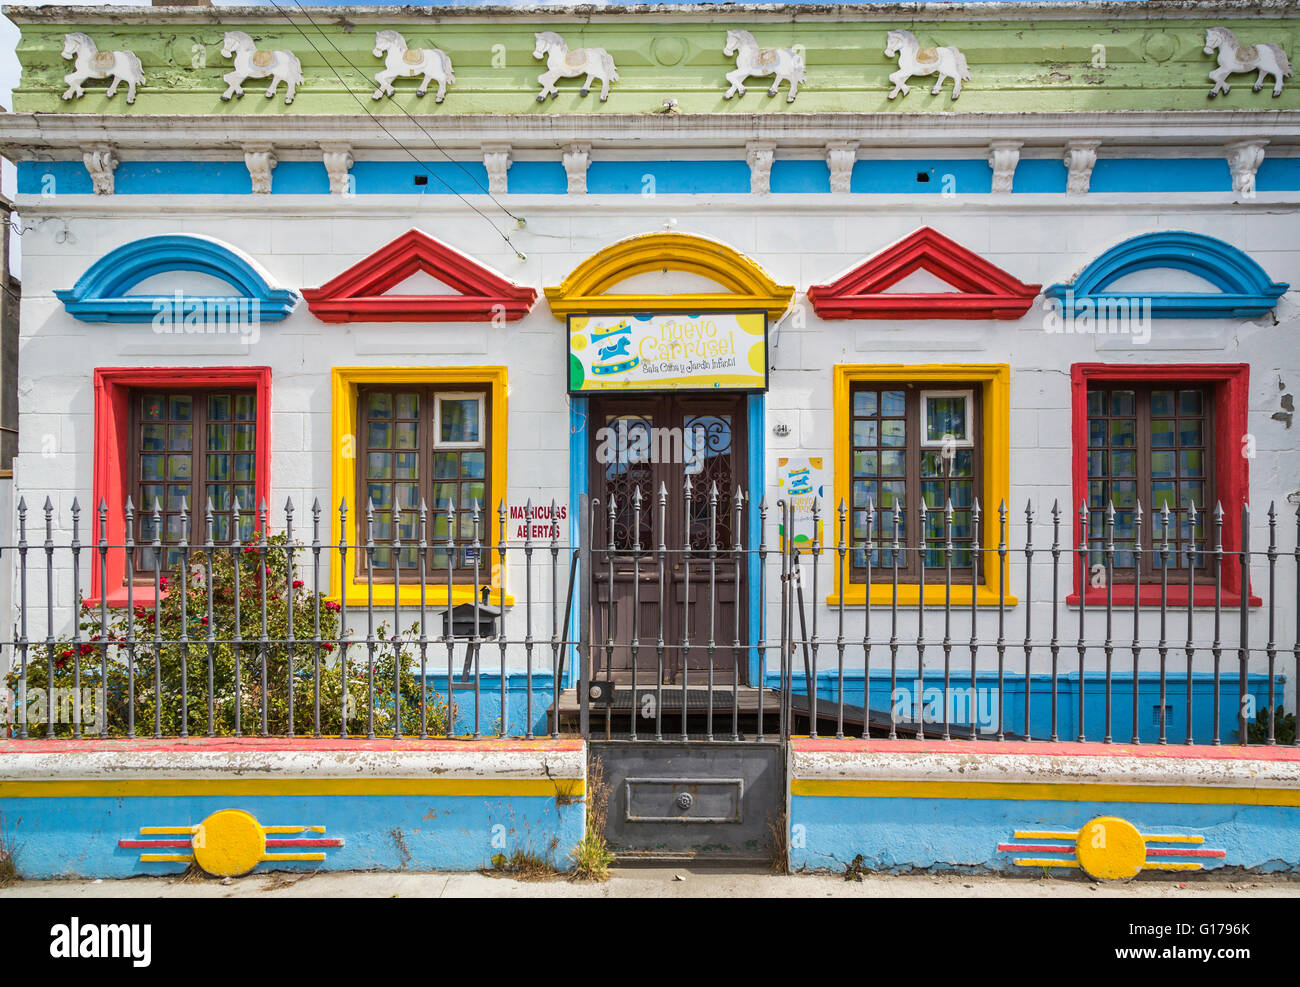 A colorful daycare center building in Punta Arenas, Chile, South America. Stock Photo